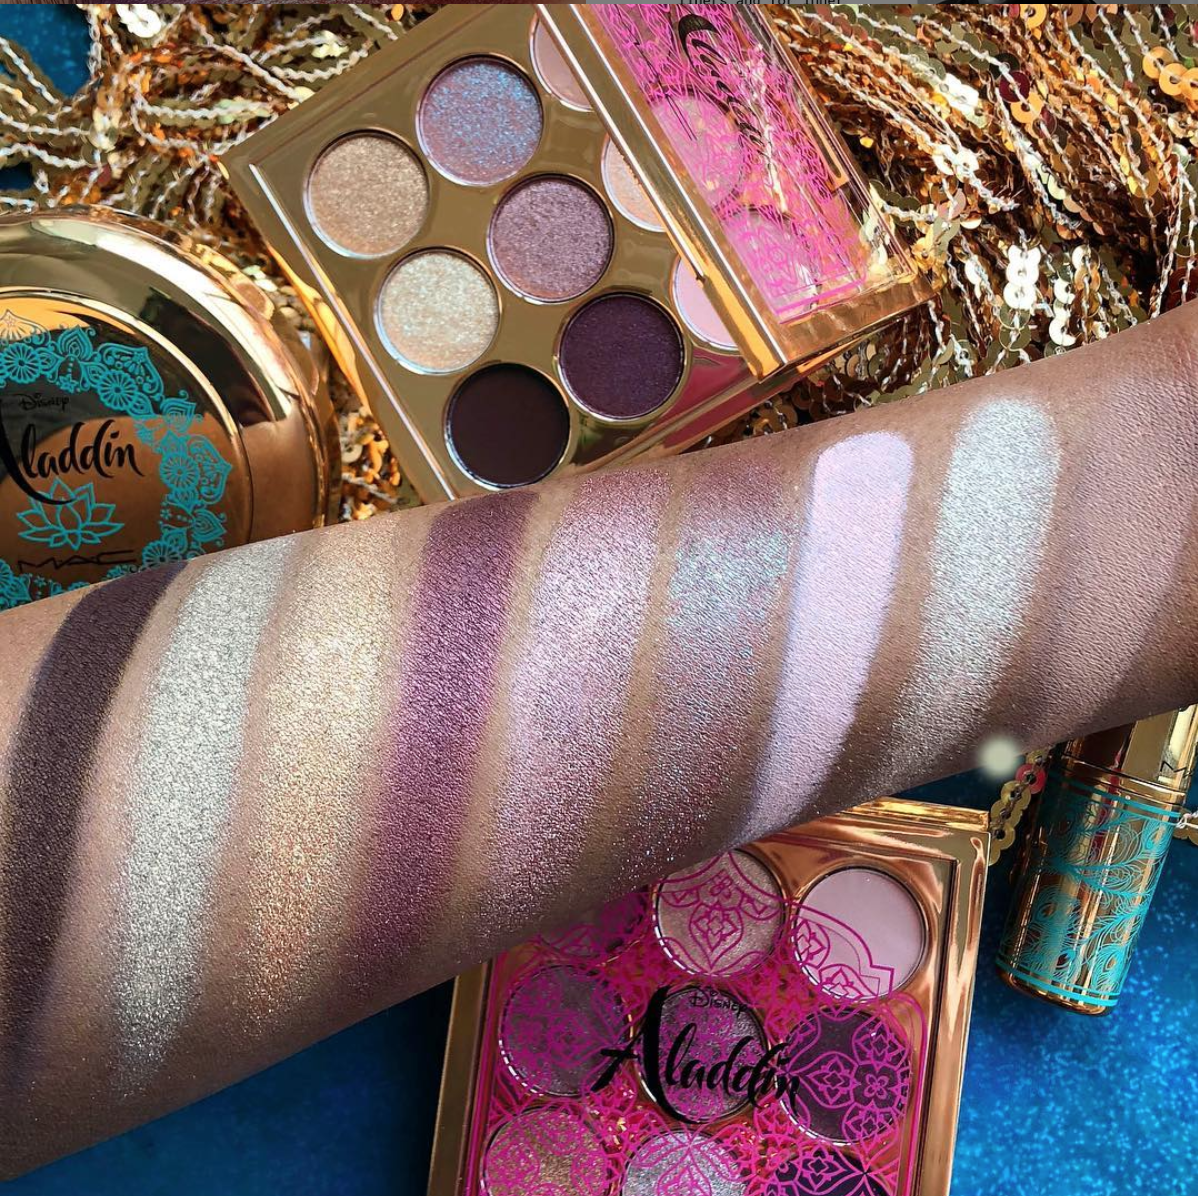 A Whole New World Of Makeup For You To Discover With New ‘Aladdin’ Inspired MAC Collection